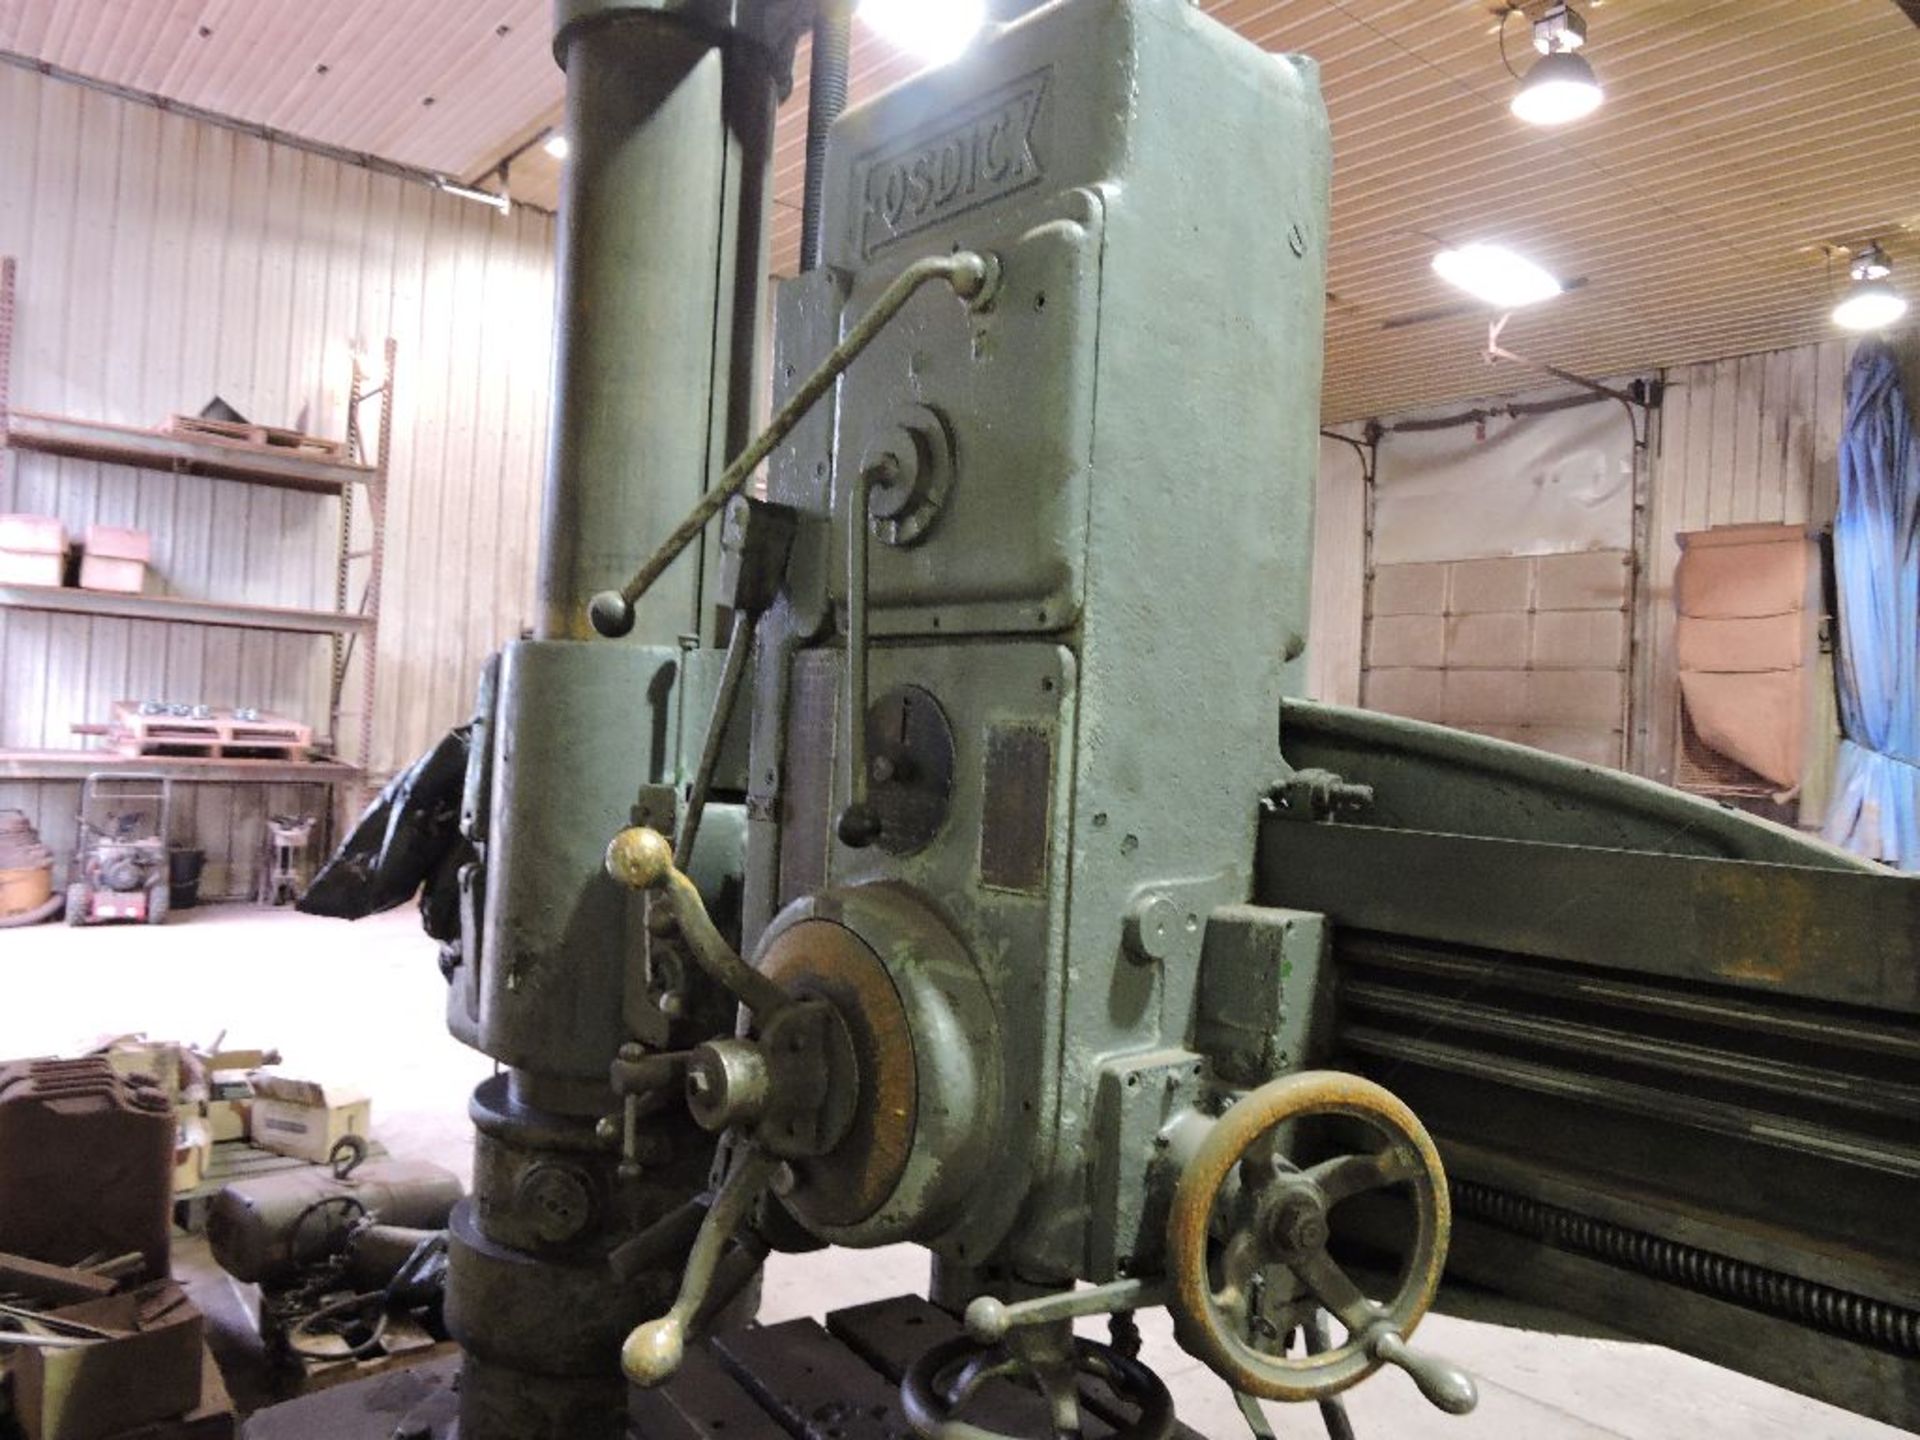 Fosdick radial arm drill, 12" column, 5' arm, 2' x 4" bed. - Image 4 of 8